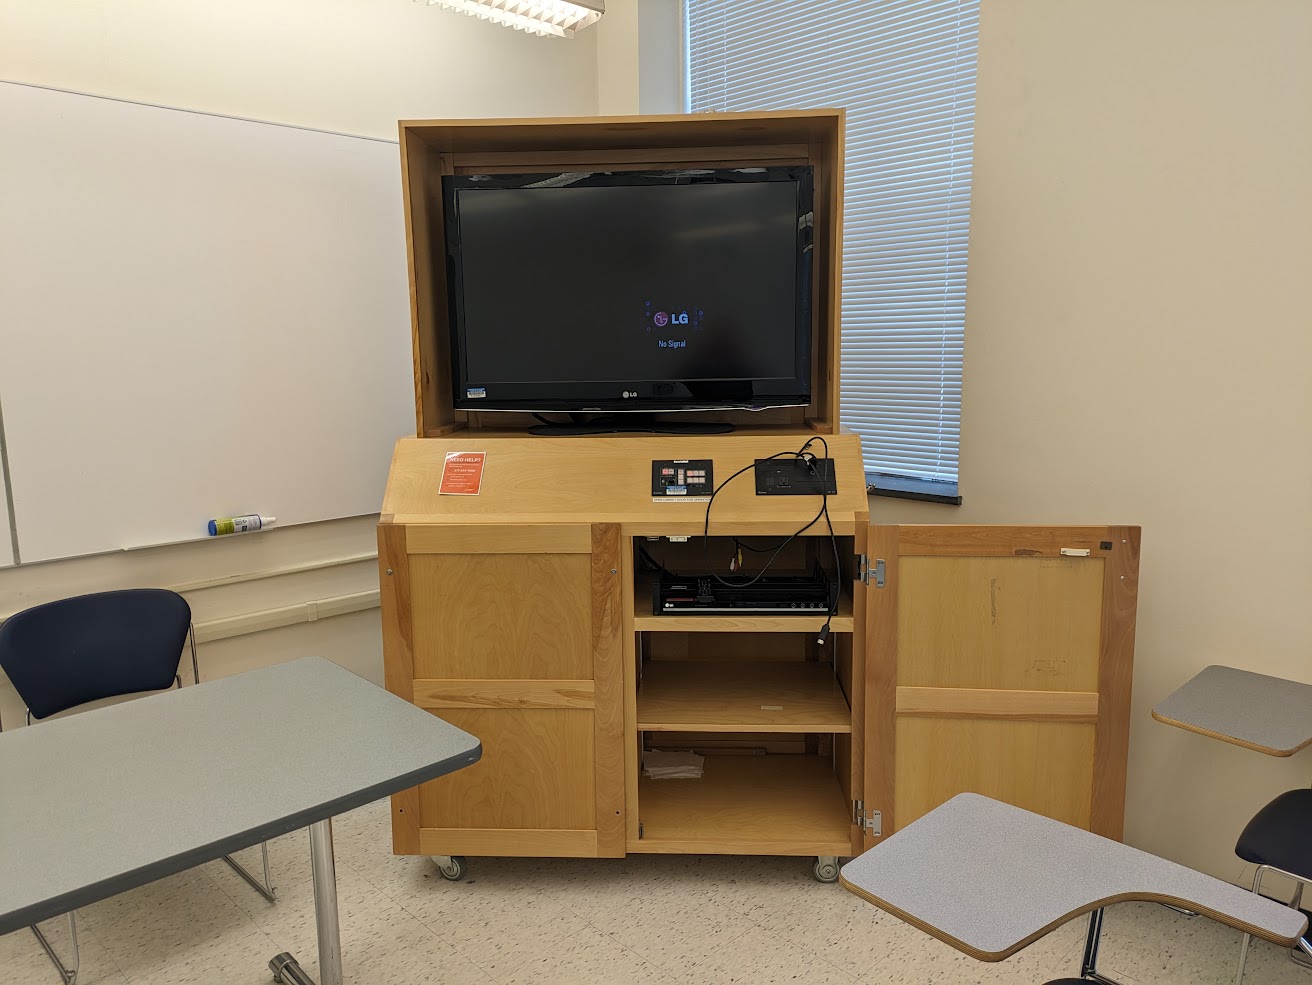 A view of the cabinet open with High Definition LCD Monitor, HDMI input, push button controller, and audio visual rack.